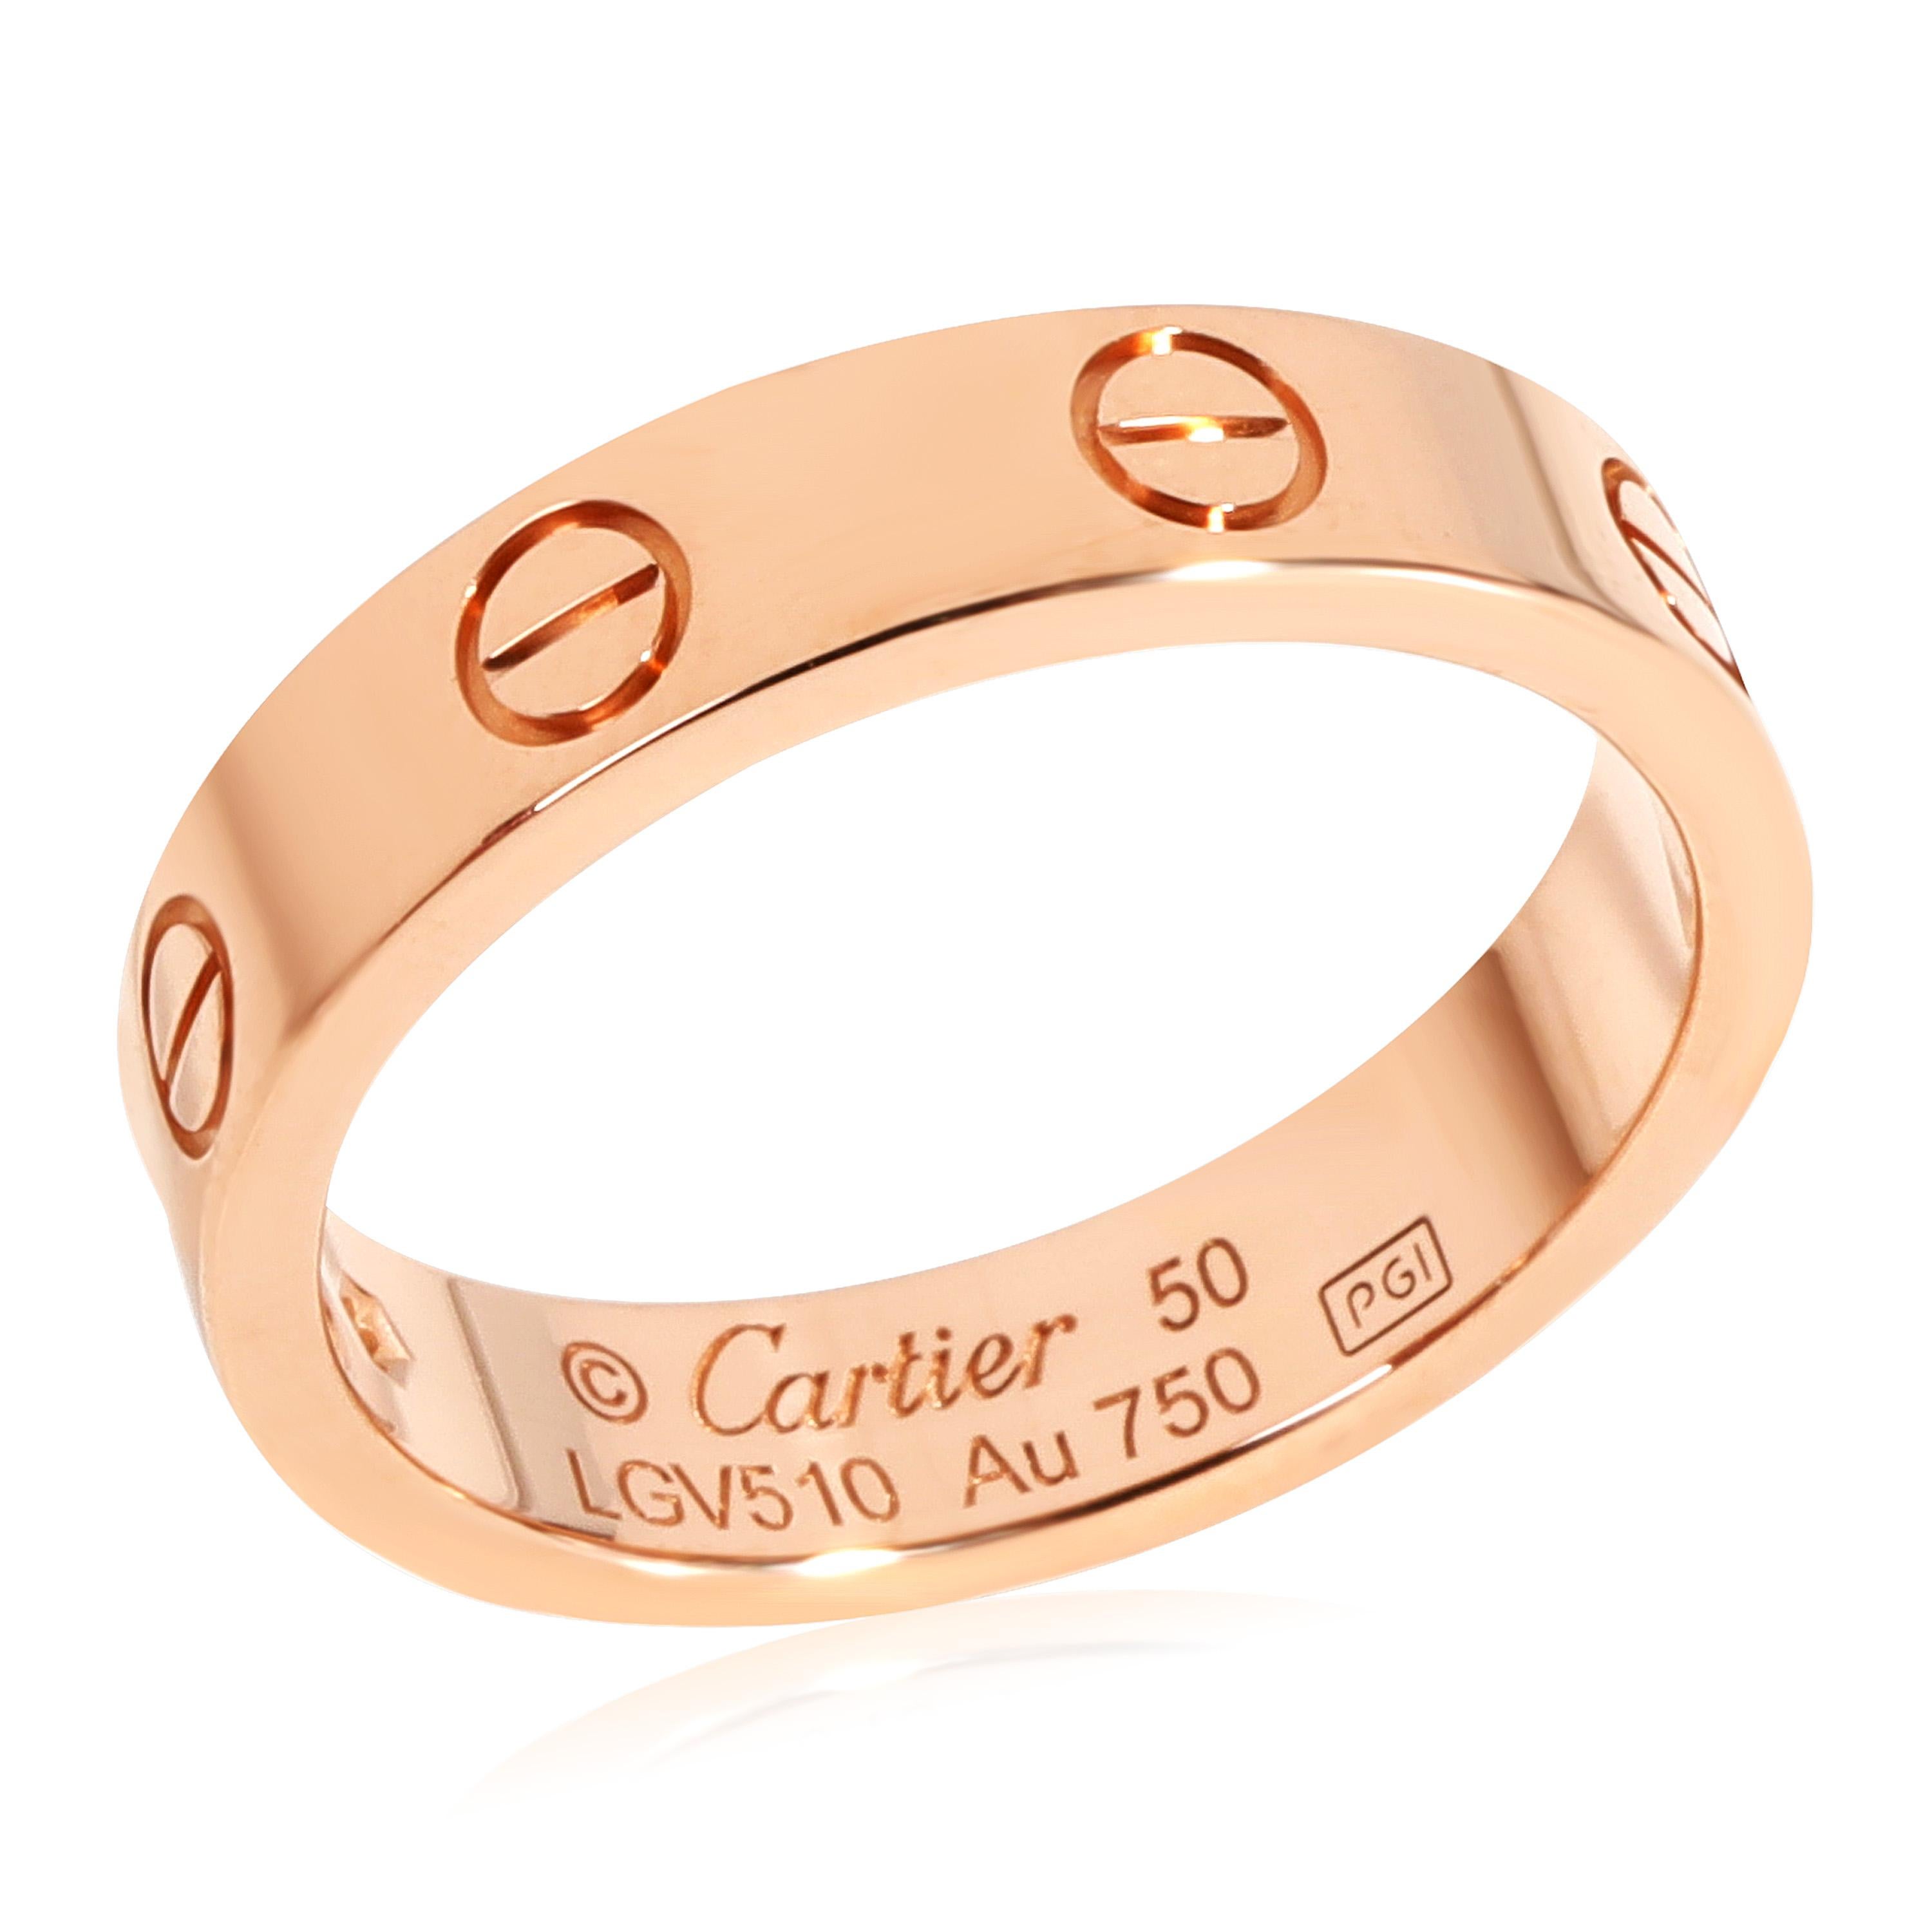 Cartier LOVE Diamond Ring in 18k Rose Gold 0.02 CTW

PRIMARY DETAILS
SKU: 117545
Listing Title: Cartier LOVE Diamond Ring in 18k Rose Gold 0.02 CTW
Condition Description: Retails for 2220 USD. In excellent condition and recently polished. Ring size